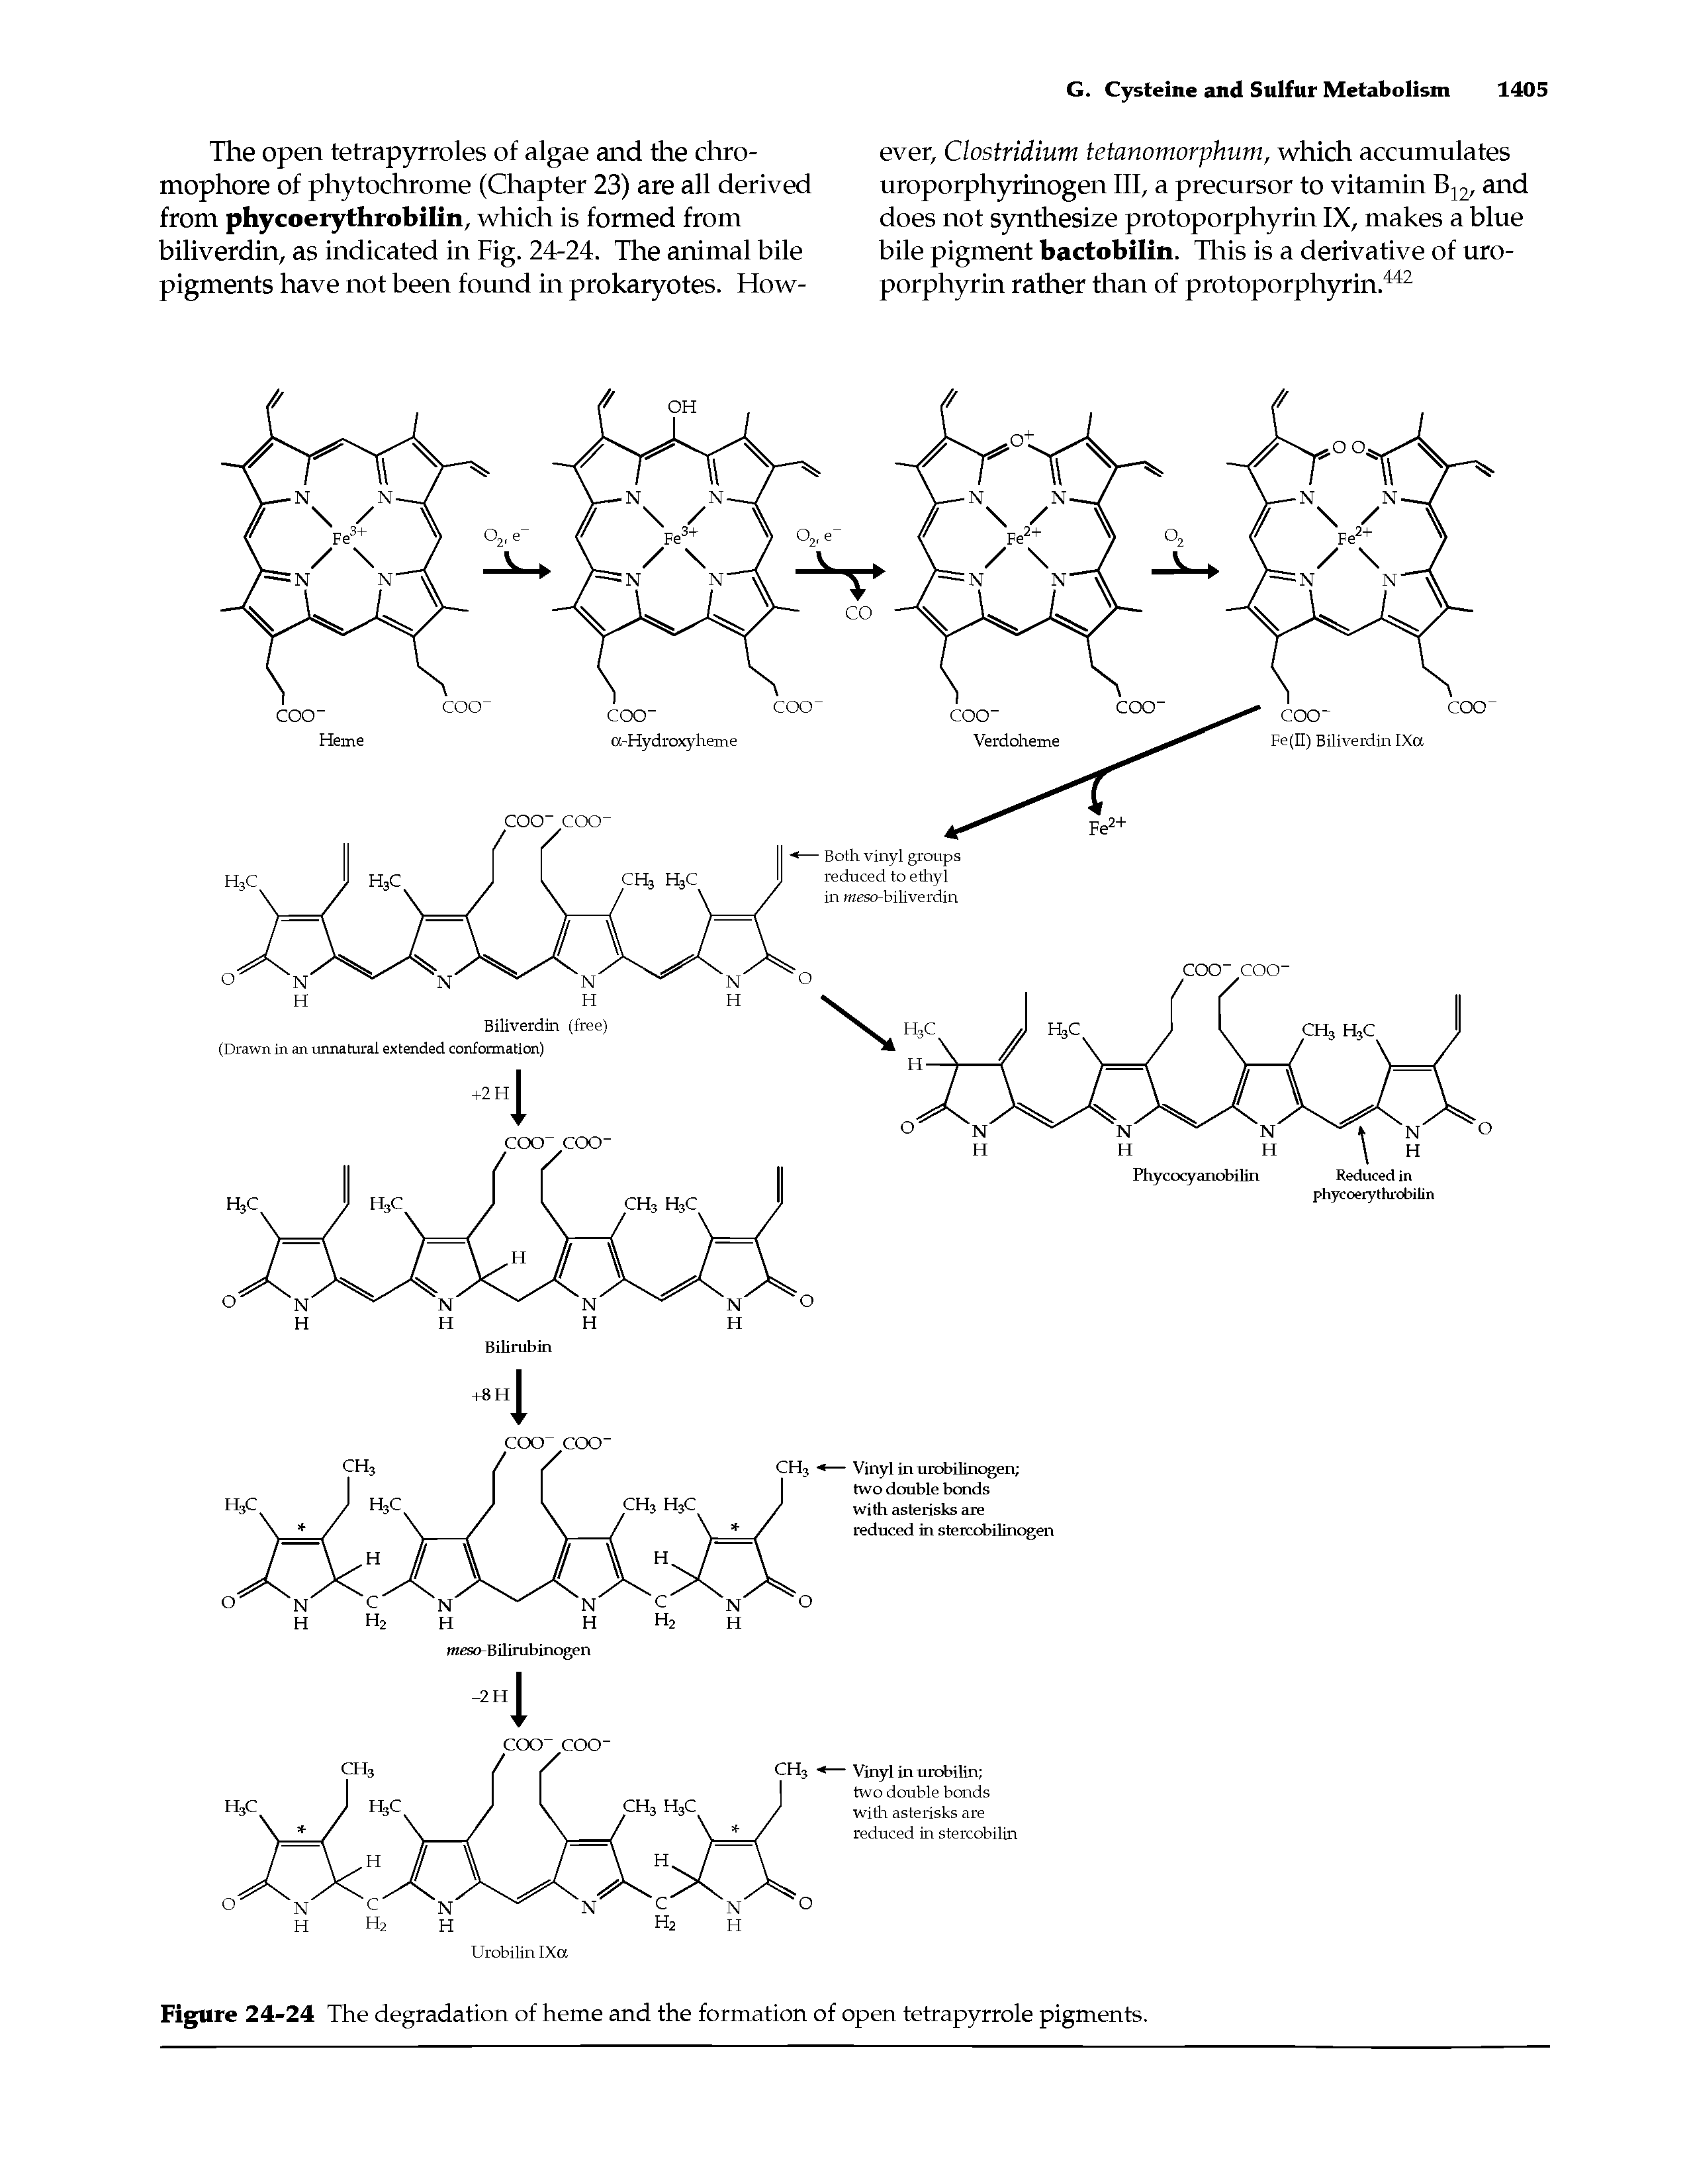 Figure 24-24 The degradation of heme and the formation of open tetrapyrrole pigments.